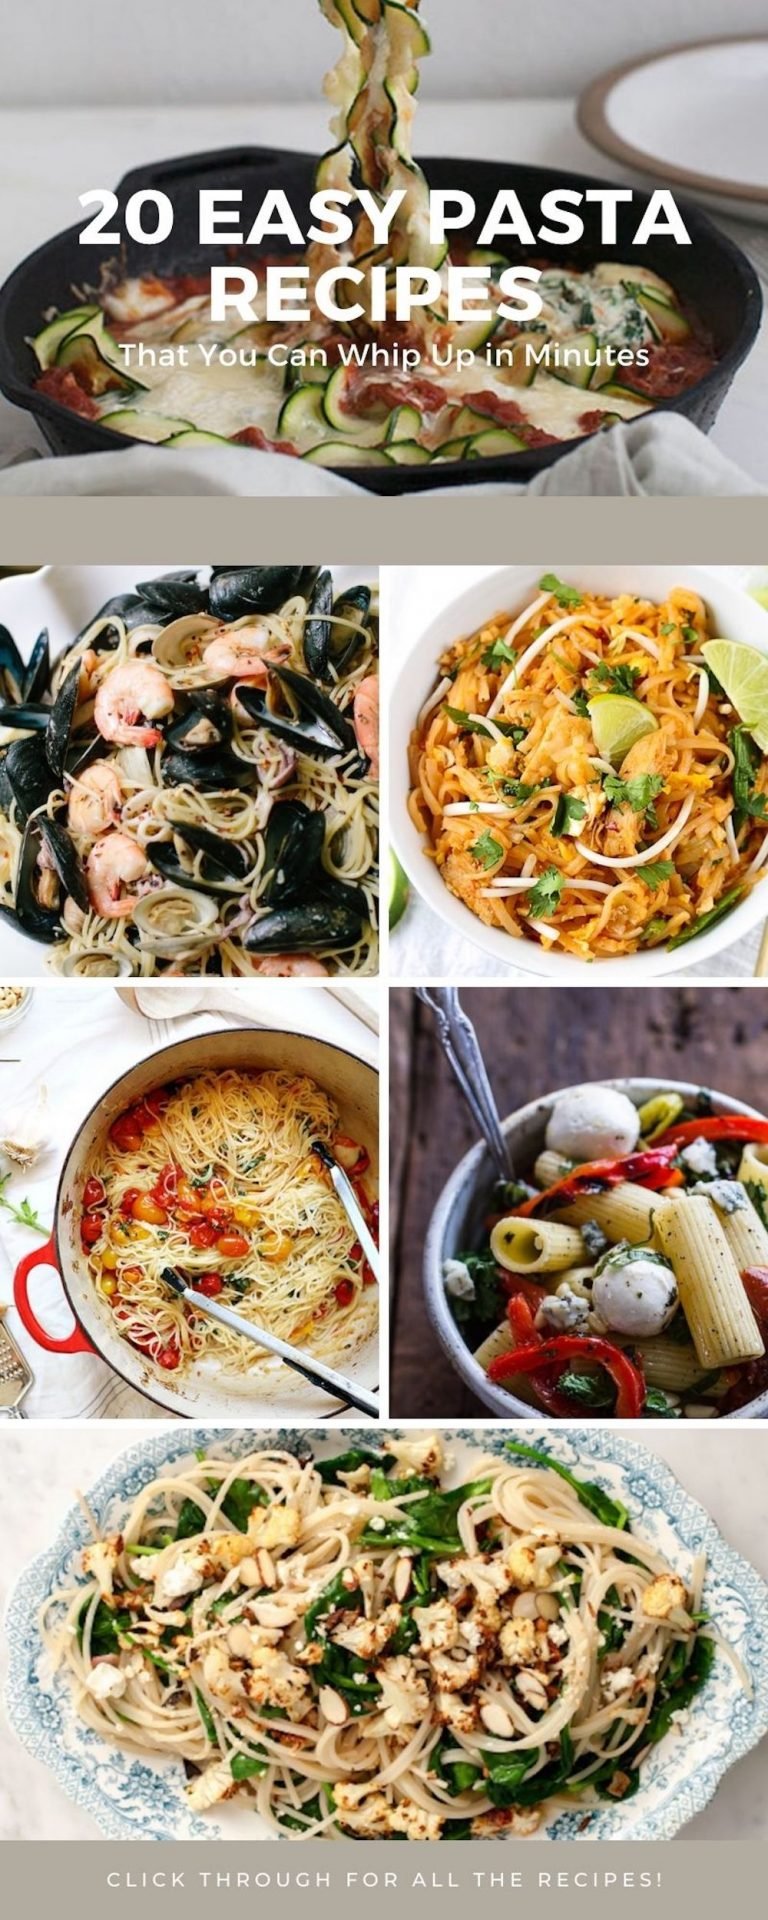 20 Easy Pasta Recipes You Can Whip Up in Minutes